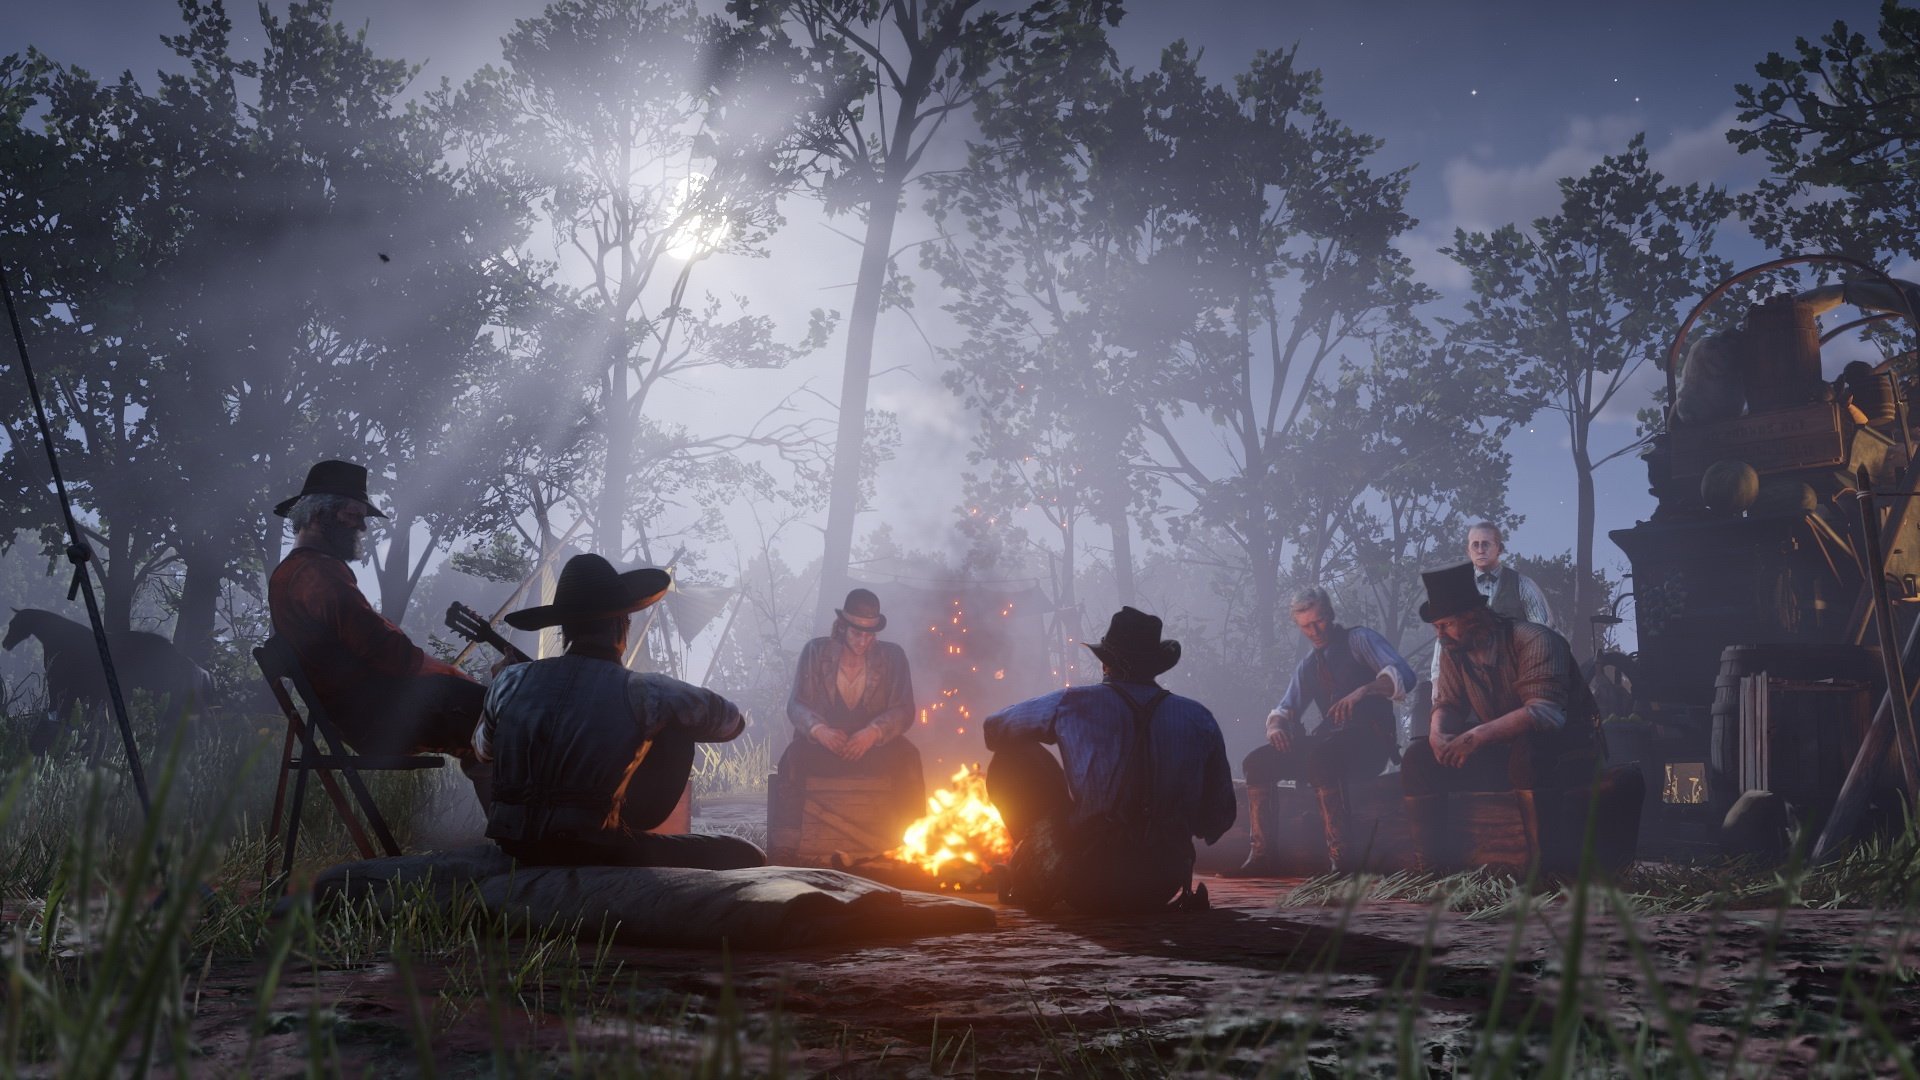 Red Dead Redemption 2' (PS4) review: Searching for meaning